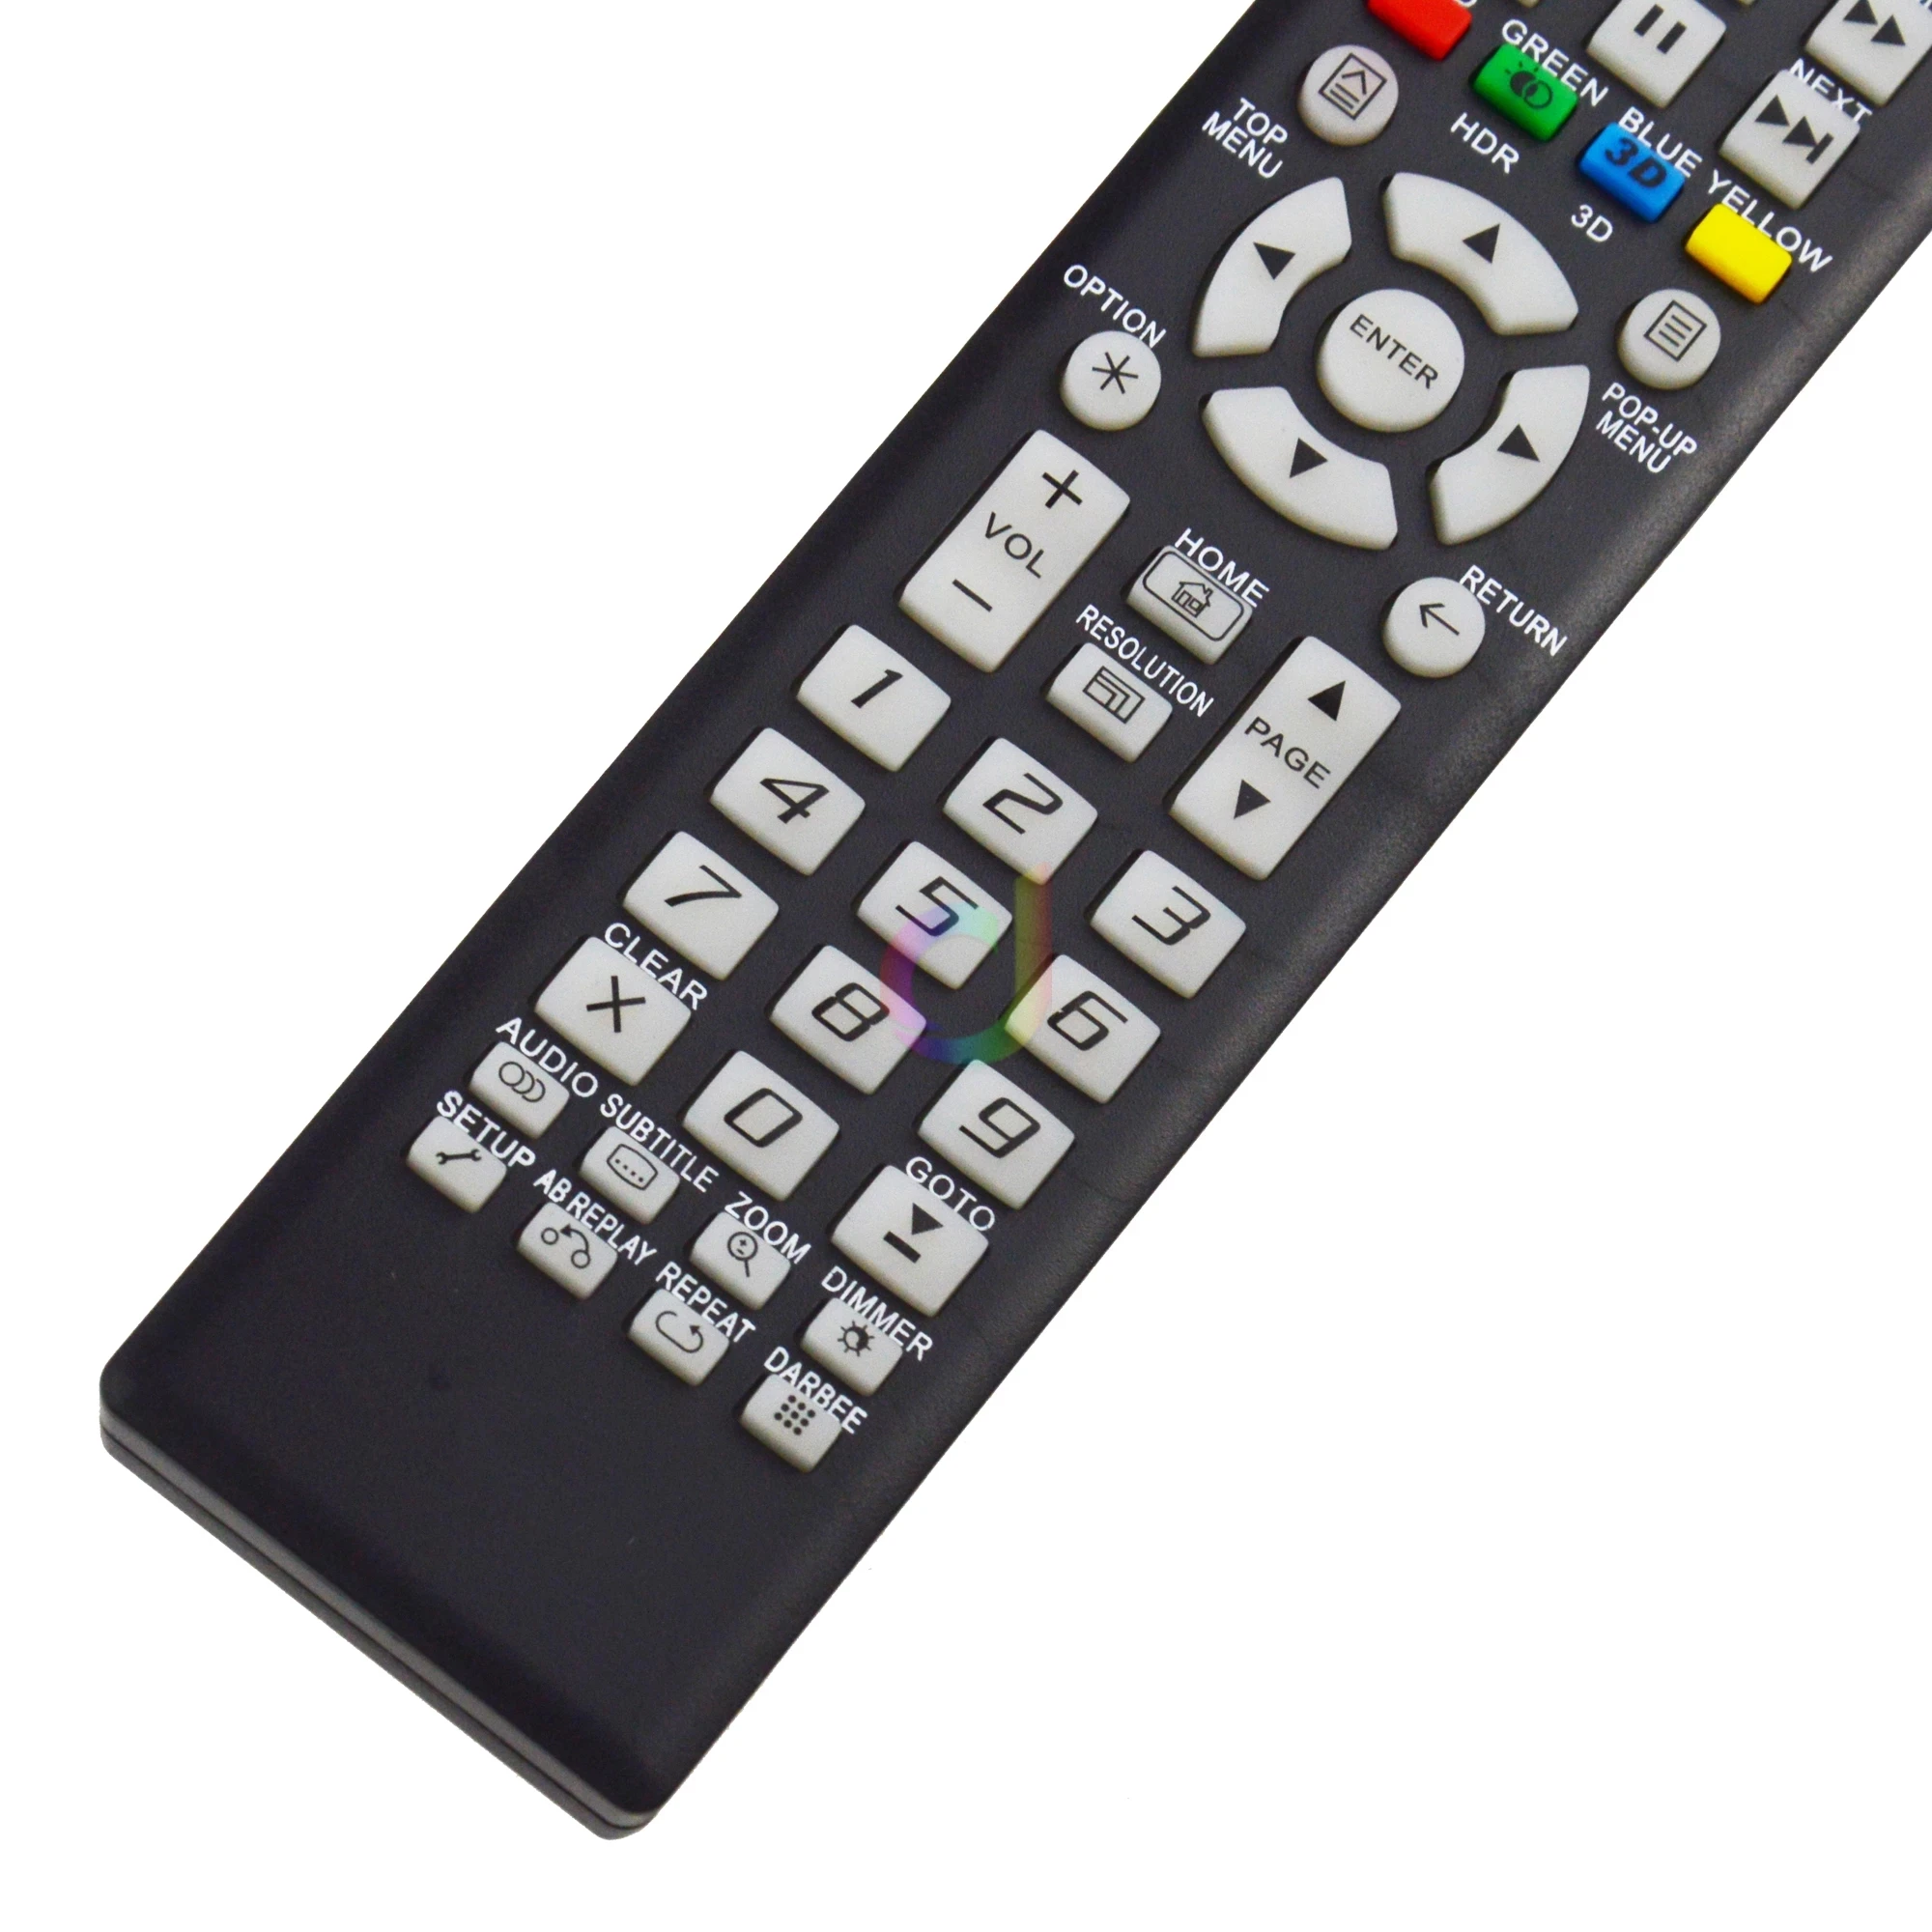 NEW Oppo Remote Control For Previous BDP-103 BDP-105 Blu-Ray Players 103D 105D